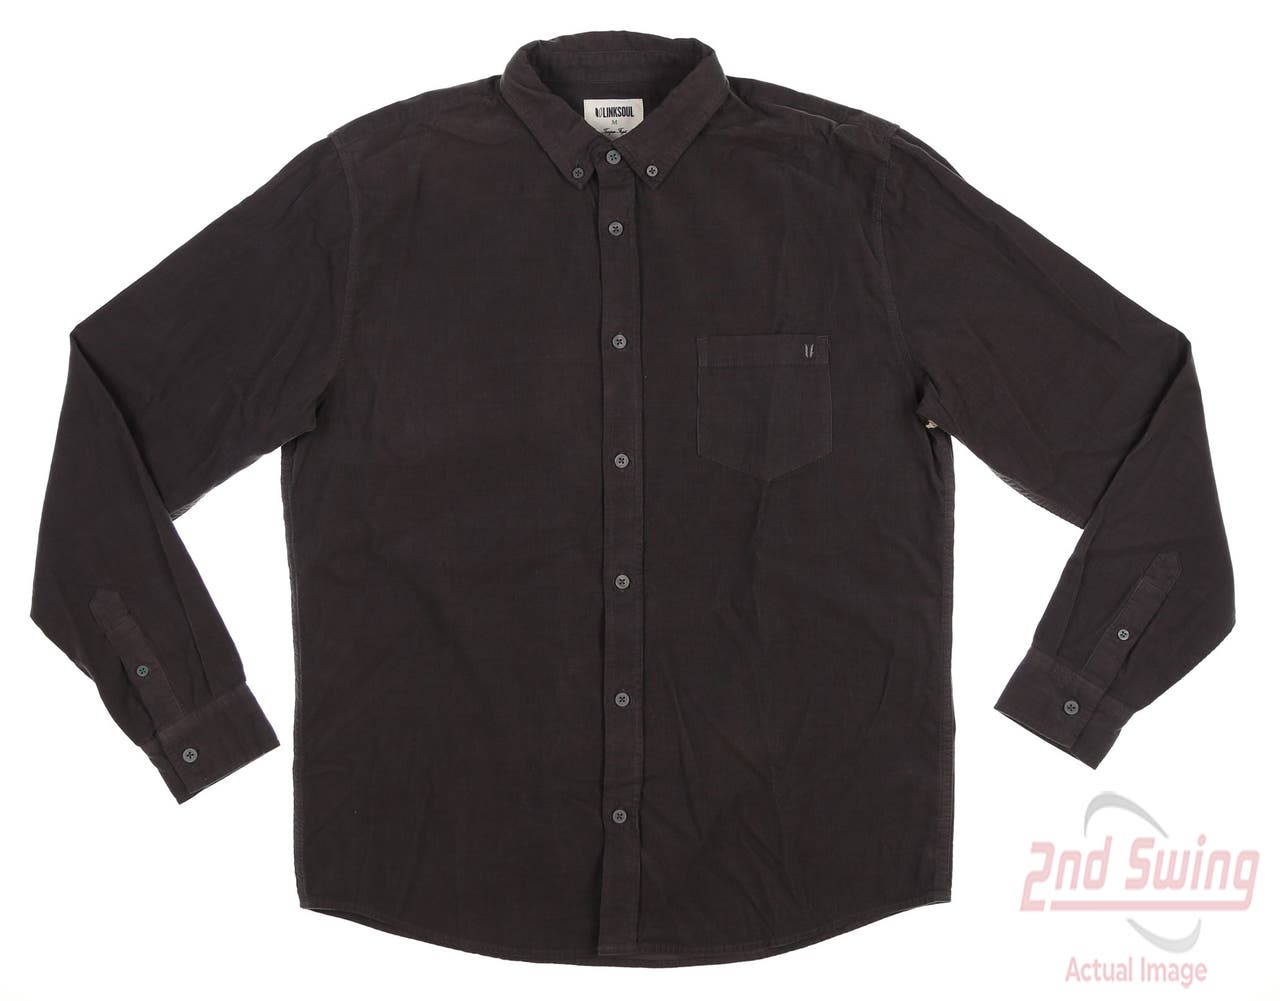 New Mens LinkSoul Pinwale Corduroy Button Up X-Large XL Charcoal MSRP $98